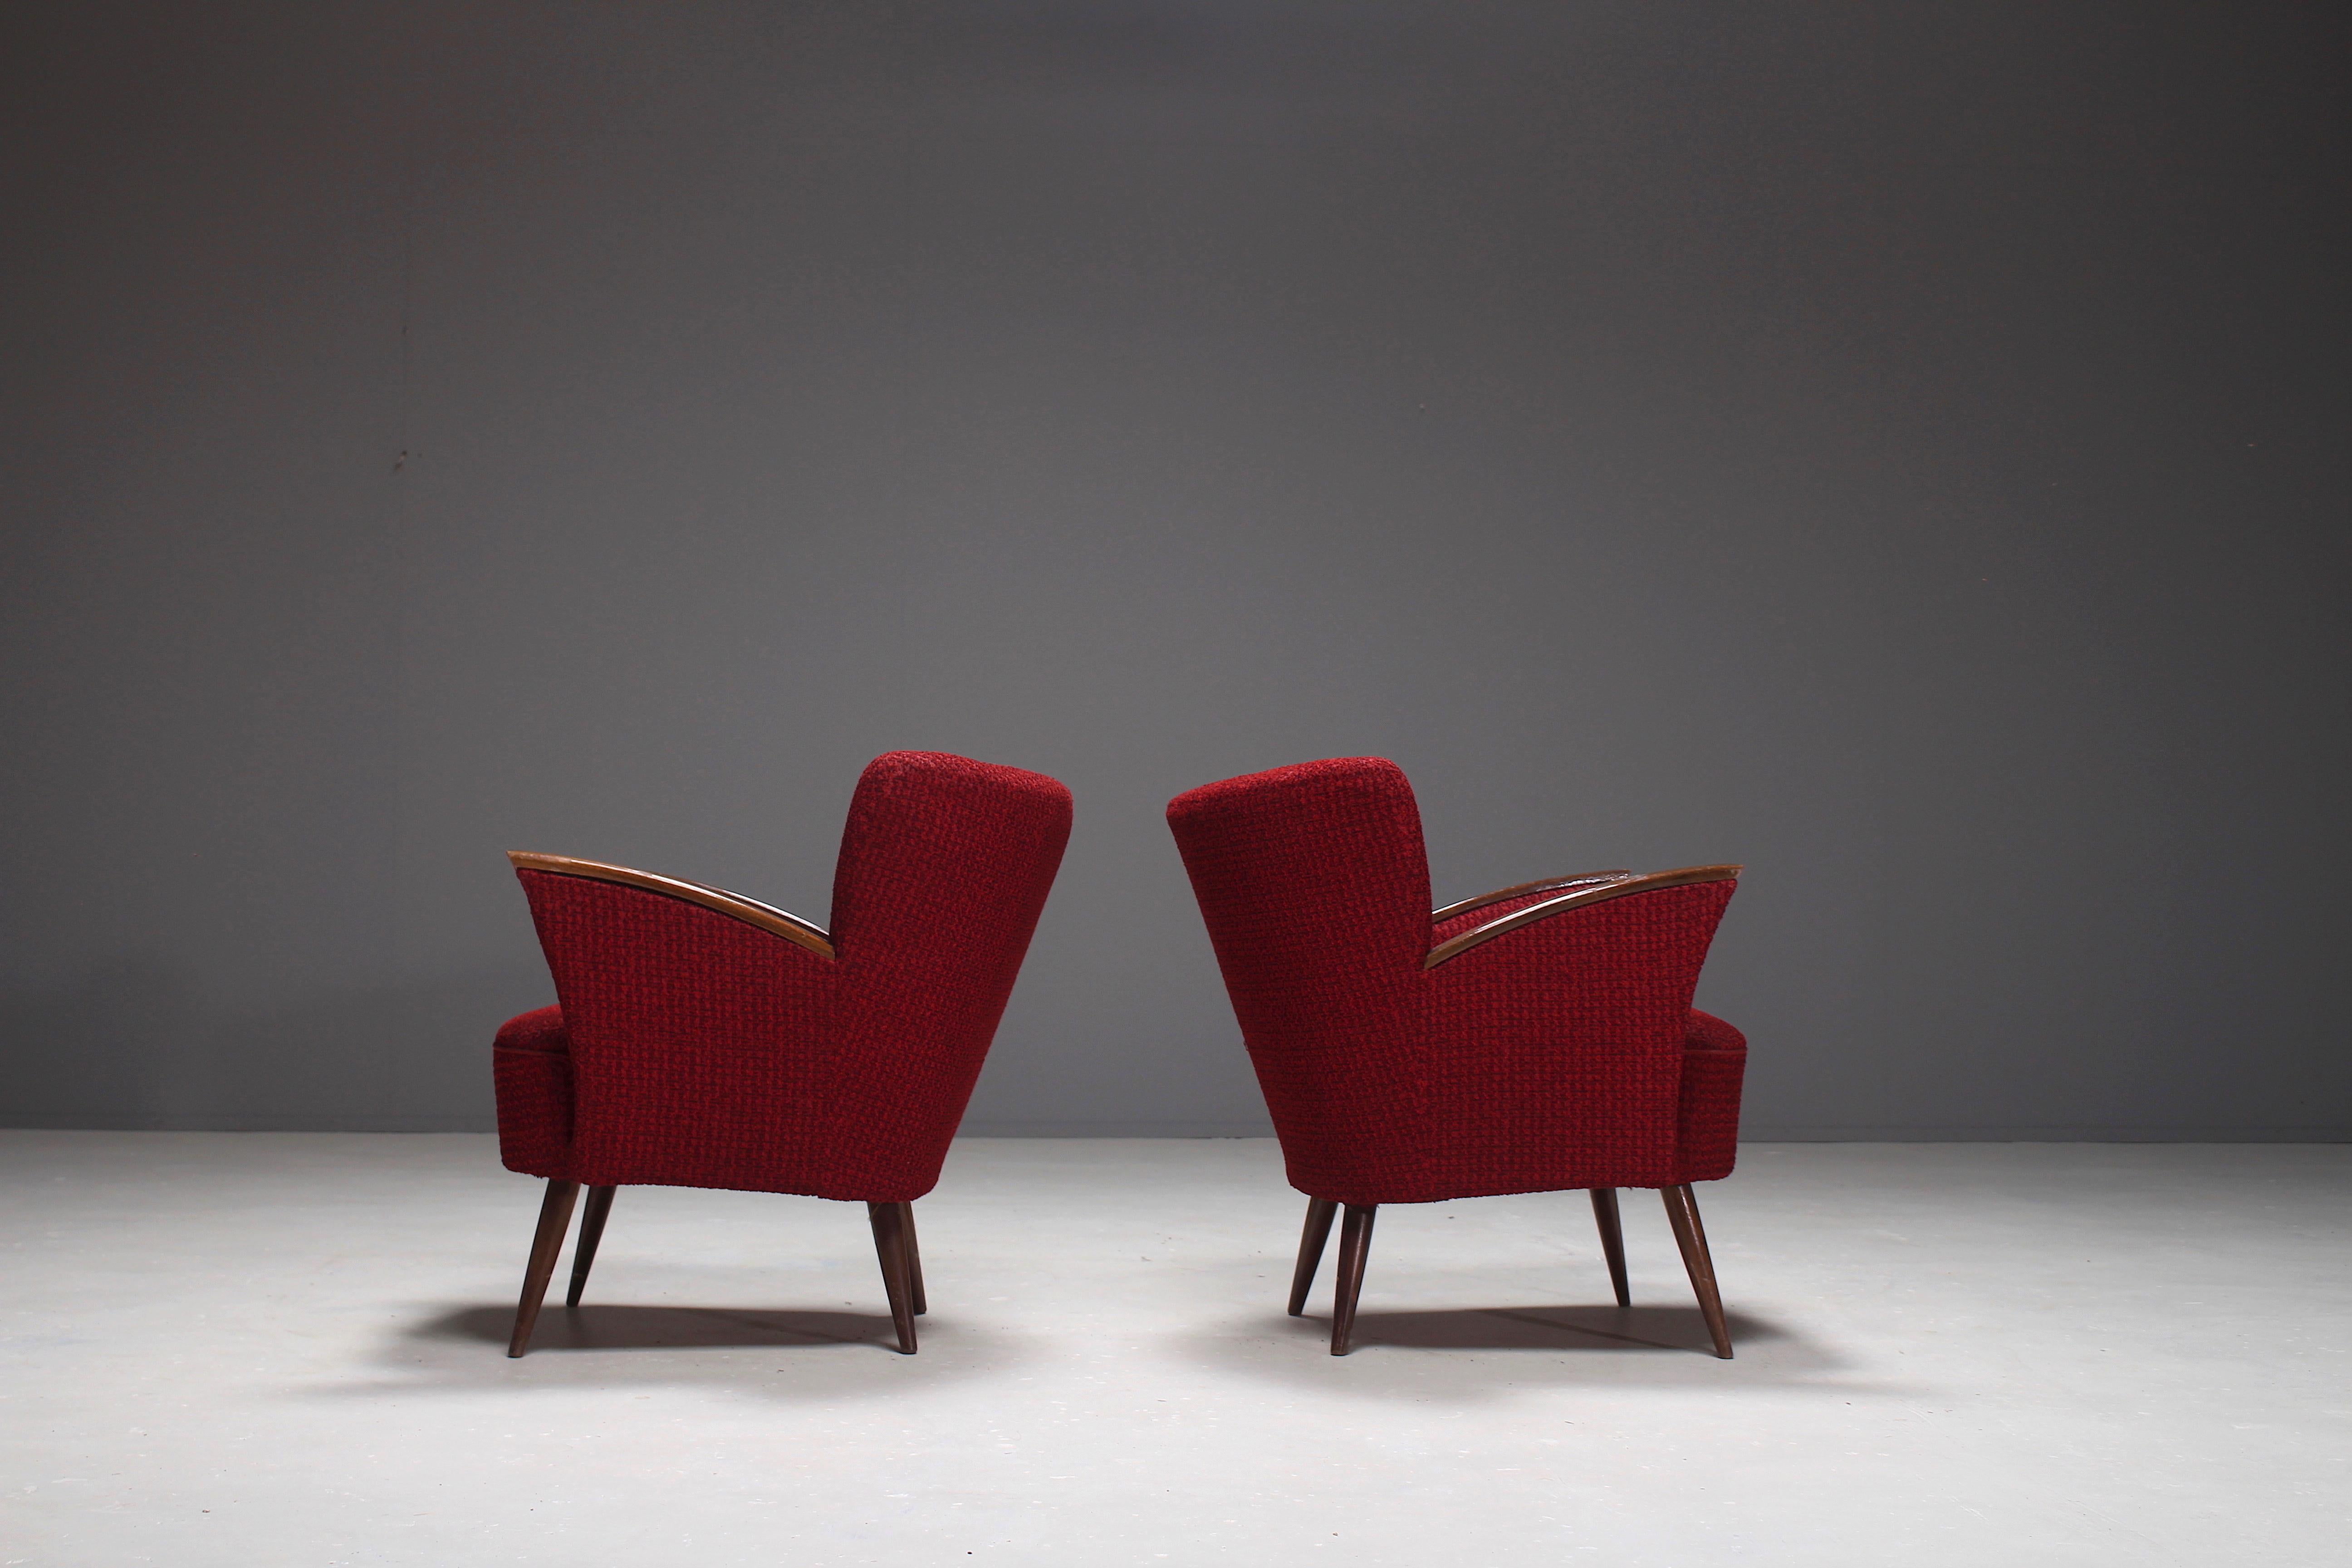 Mid-20th Century Pair of Italian Gio Ponti Style Club Chairs in Red Wool Fabric, 1950s For Sale